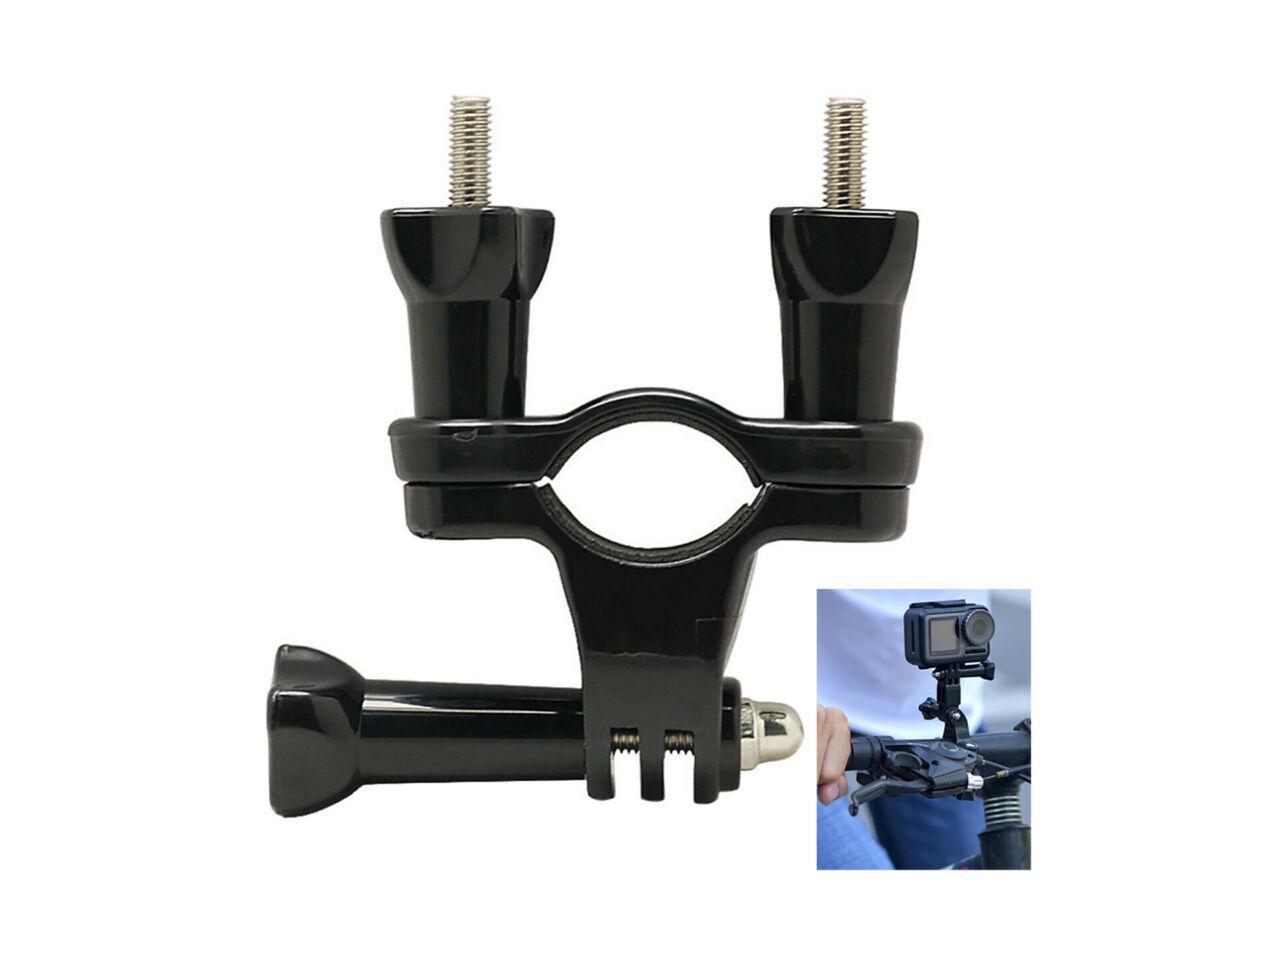 Bike Handlebar Mount Bicycle Clamp Holder For Apeman A60 A66 A70 A80 Action Cams 